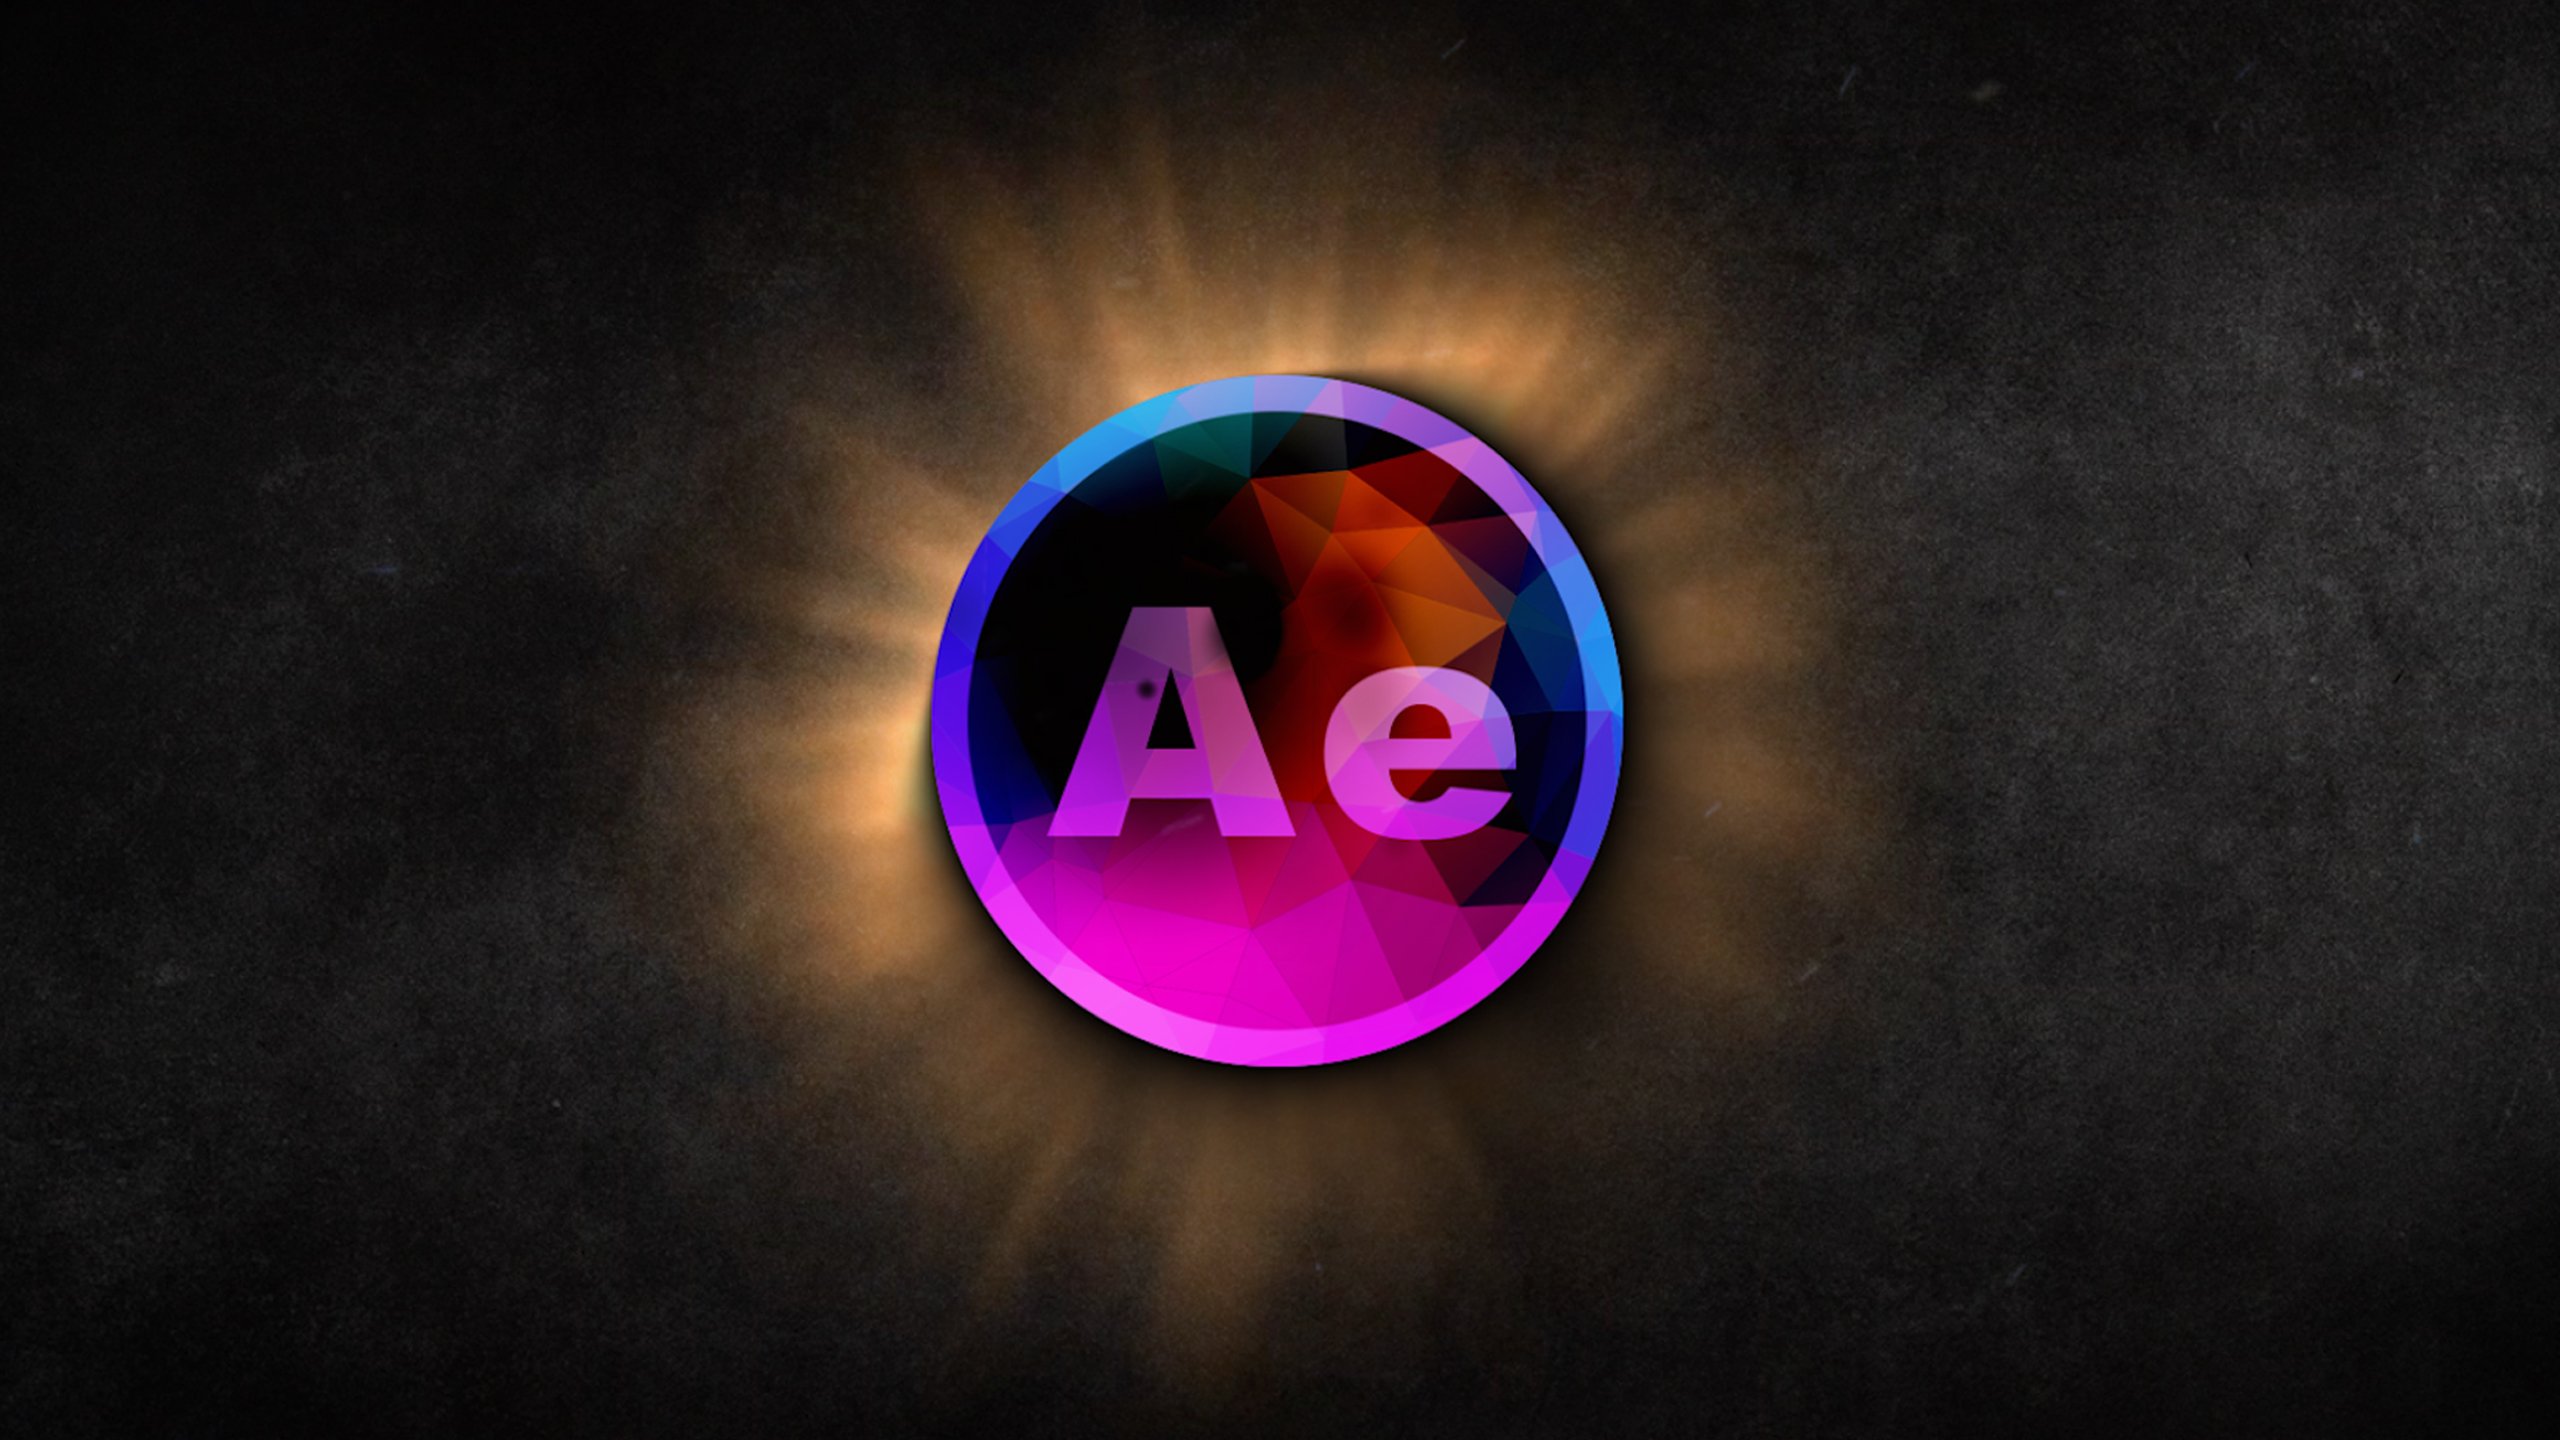 Impactful Logo Drop Animation in After Effects 2020 Beginner & Intermediate Users. Andrew Pach ⭐